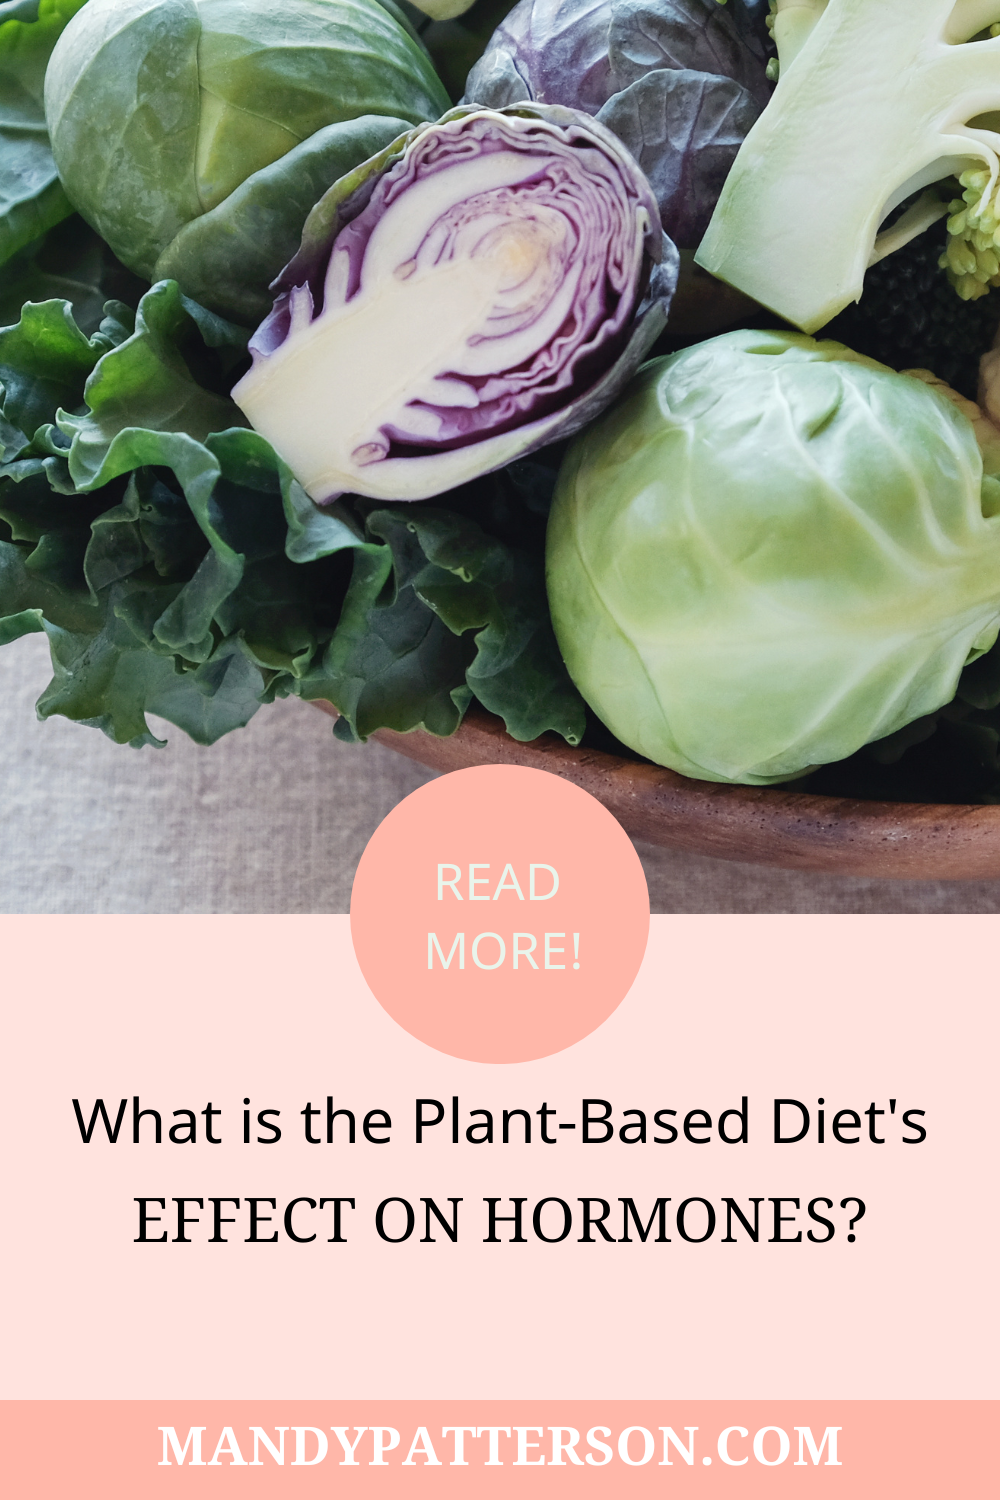 What is The Plant-Based Diet’s Effect on Hormones?